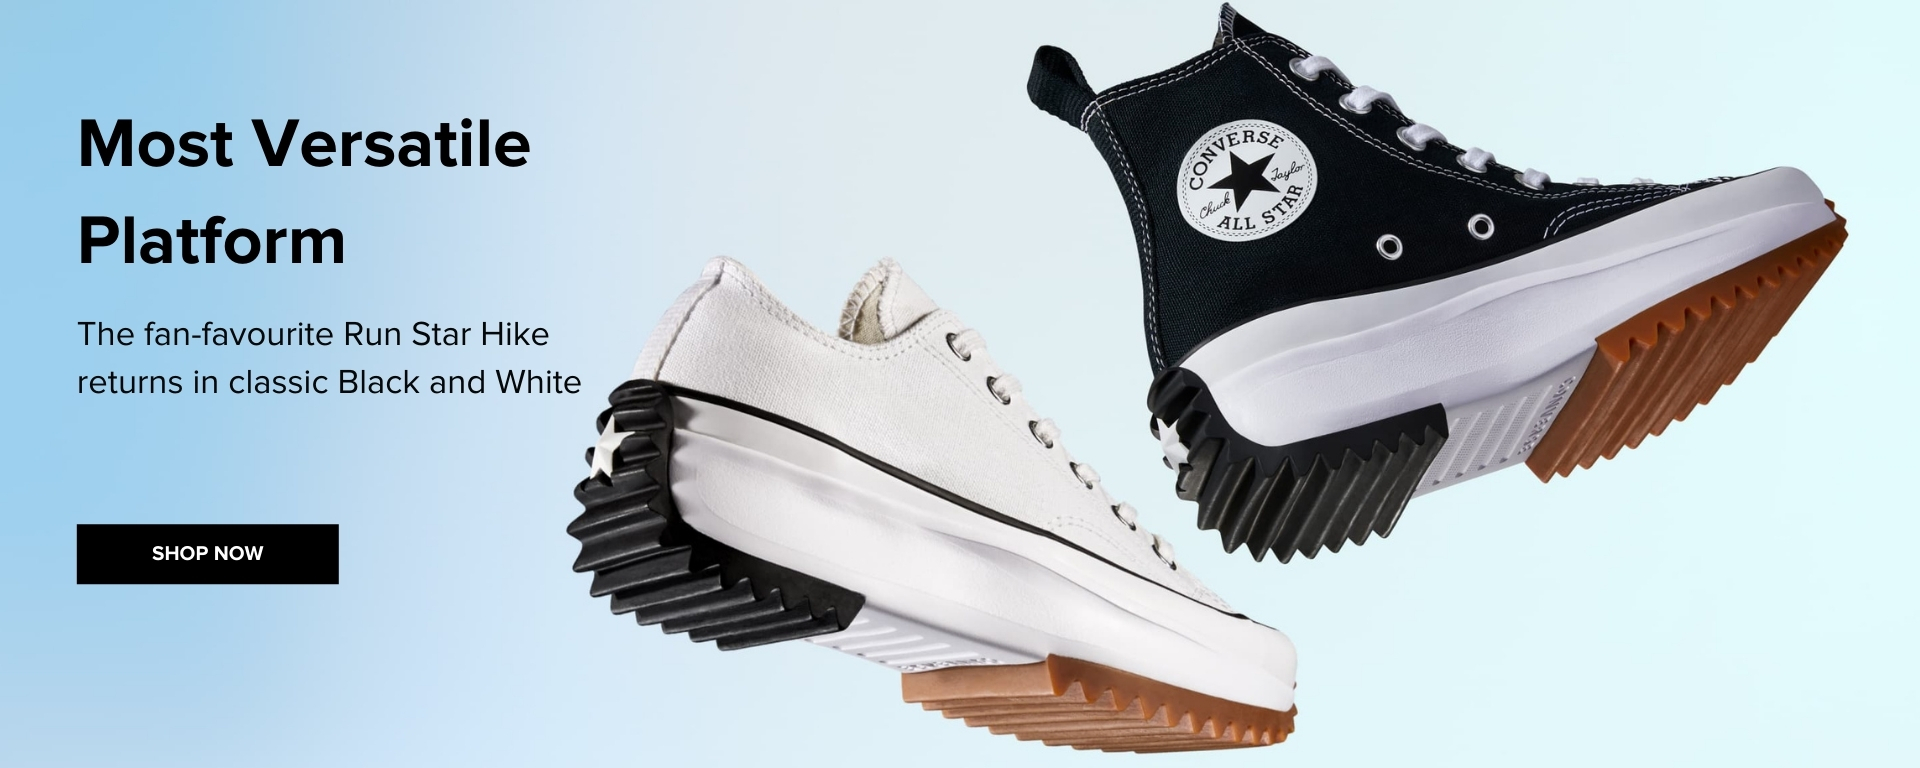 converse jack purcell south africa